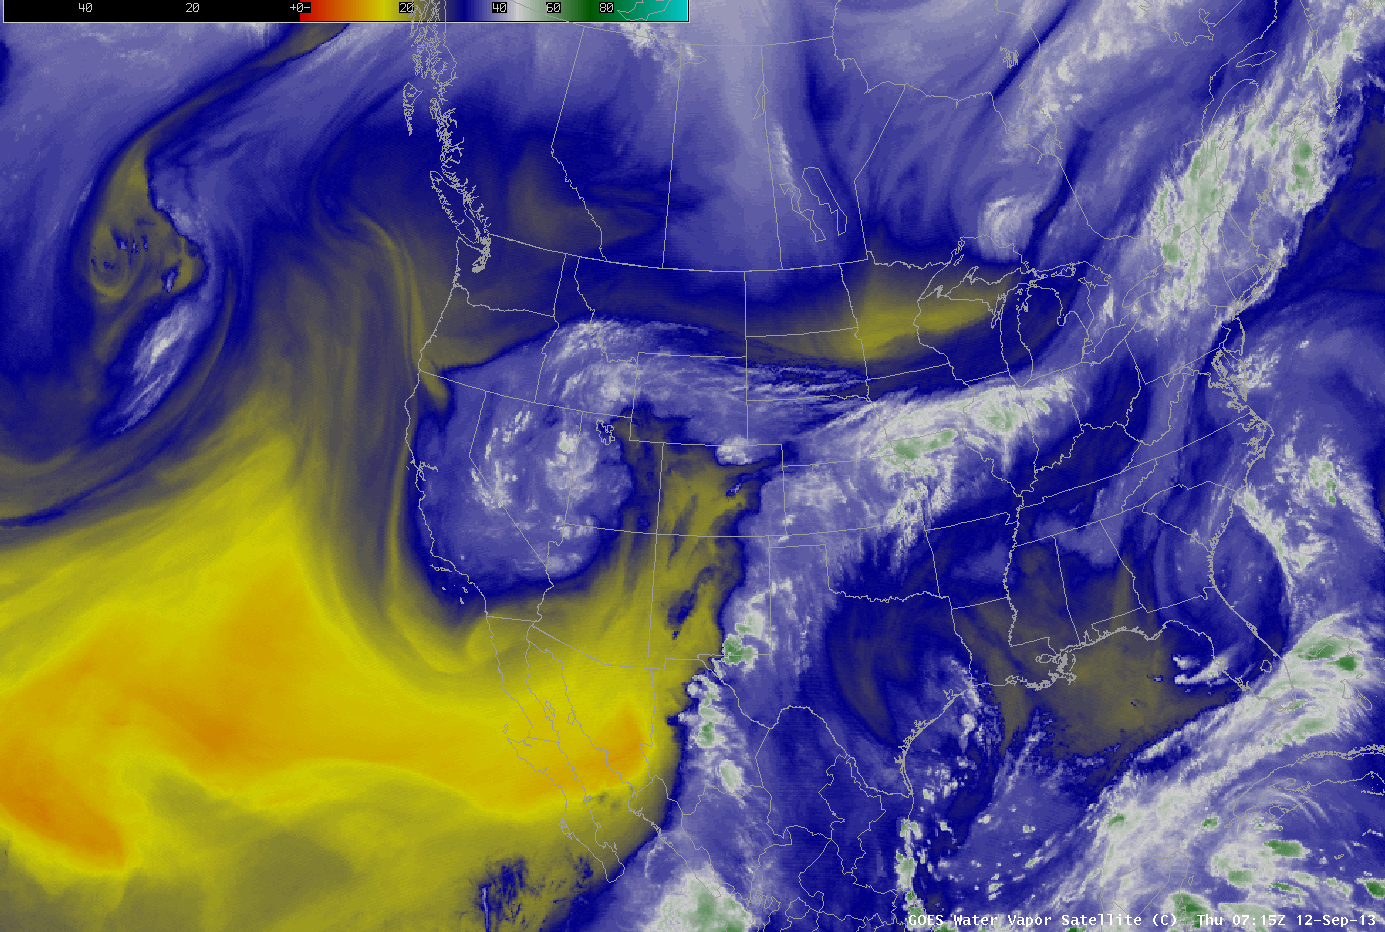 Water vapor satellite image showing tropical moisture pulled over Colorado.